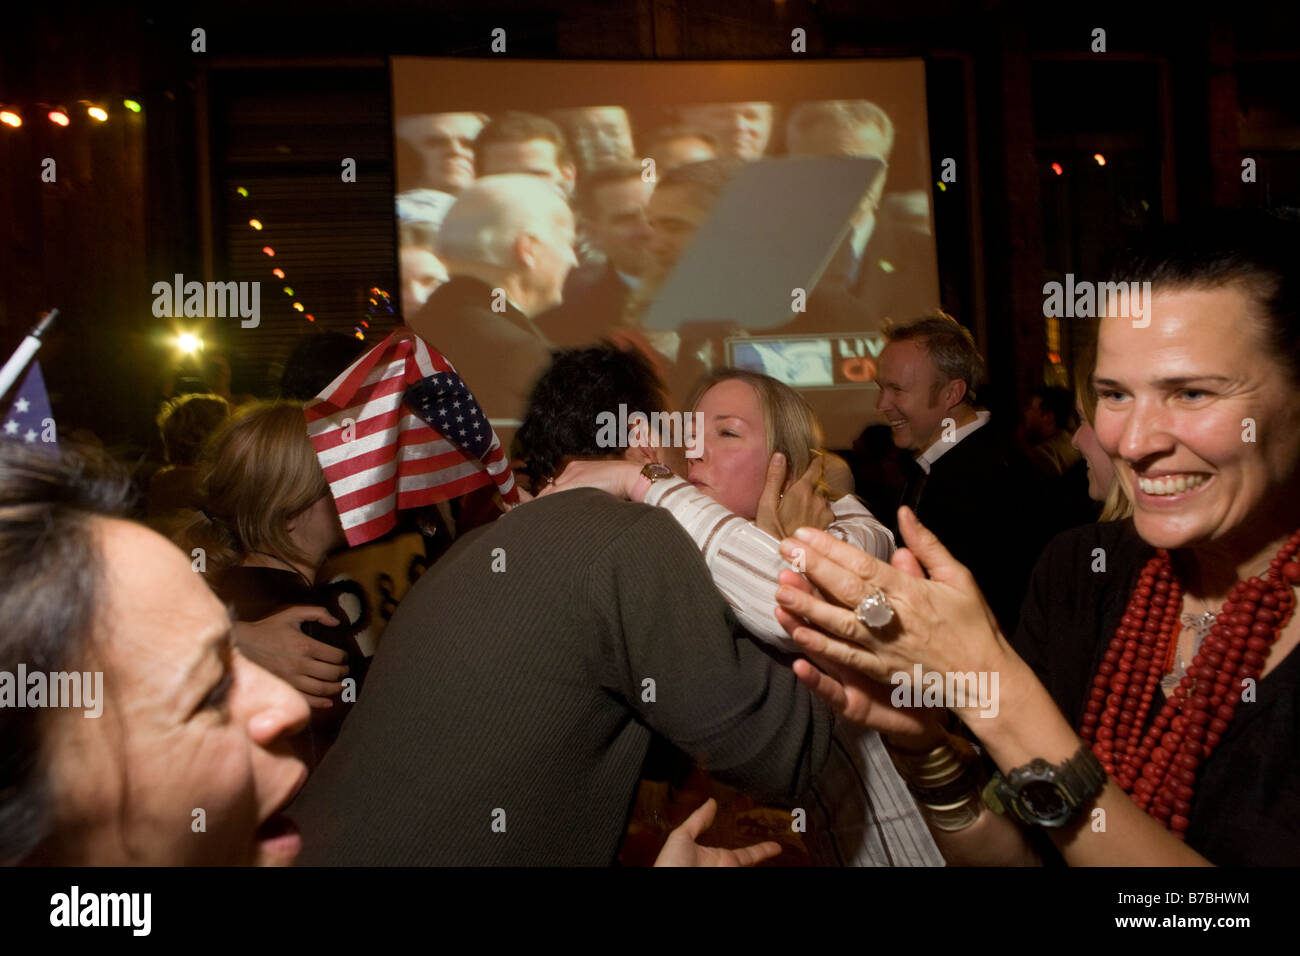 Elated US expatriate citizens celebrate Barack Obama's inauguration as the 44th US President in London. Stock Photo